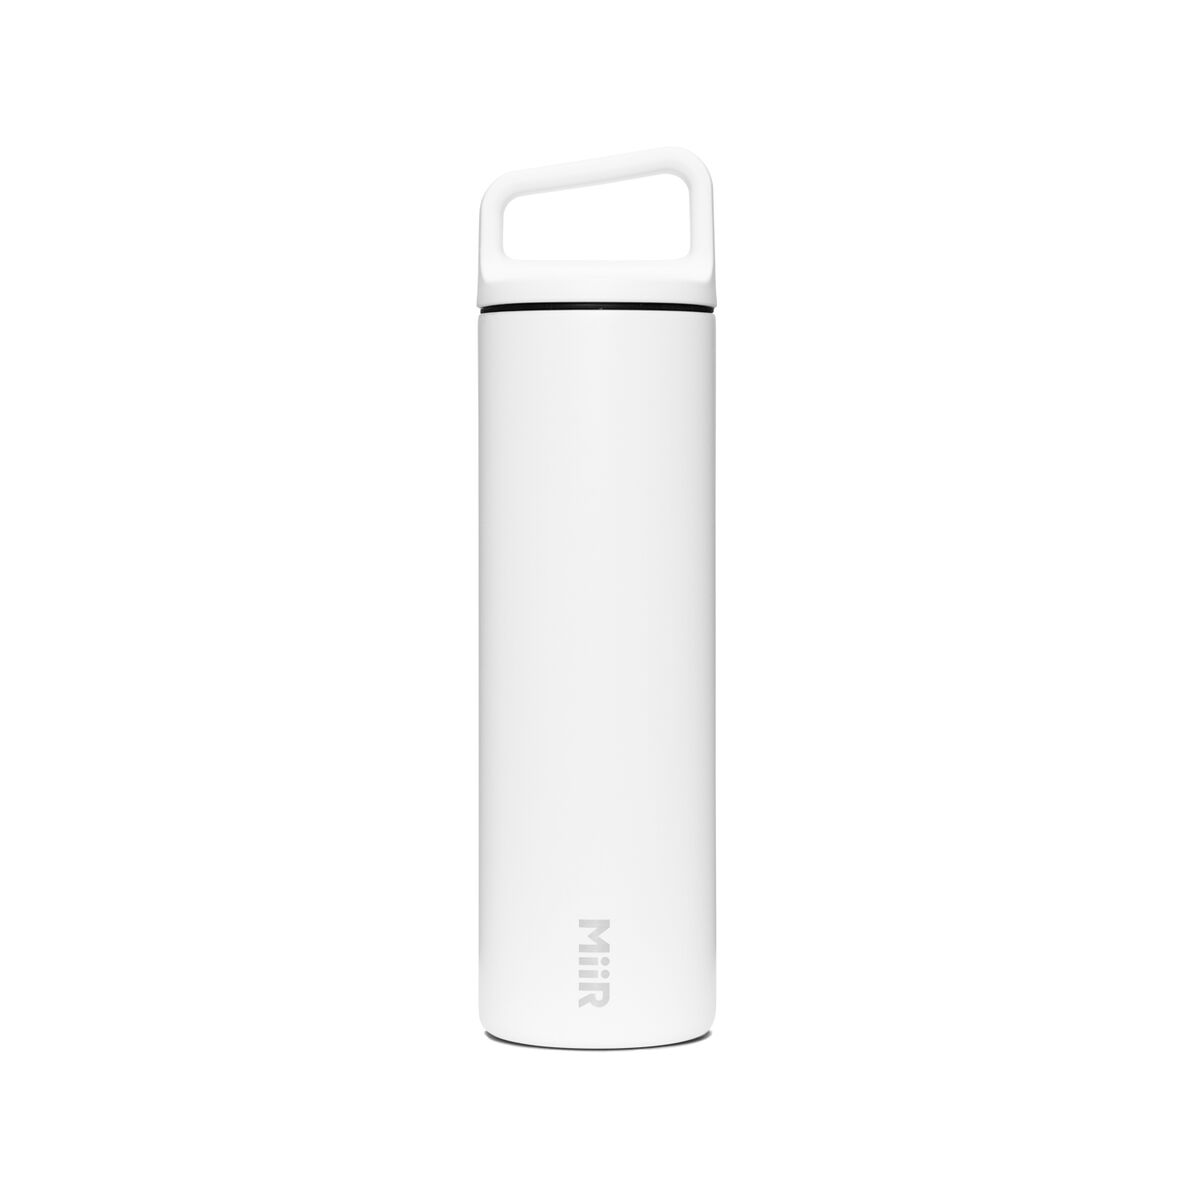 MiiR, Wide Mouth Water Bottle, Vacuum Insulated Leakproof, Stainless Steel Construction, White, 16 oz